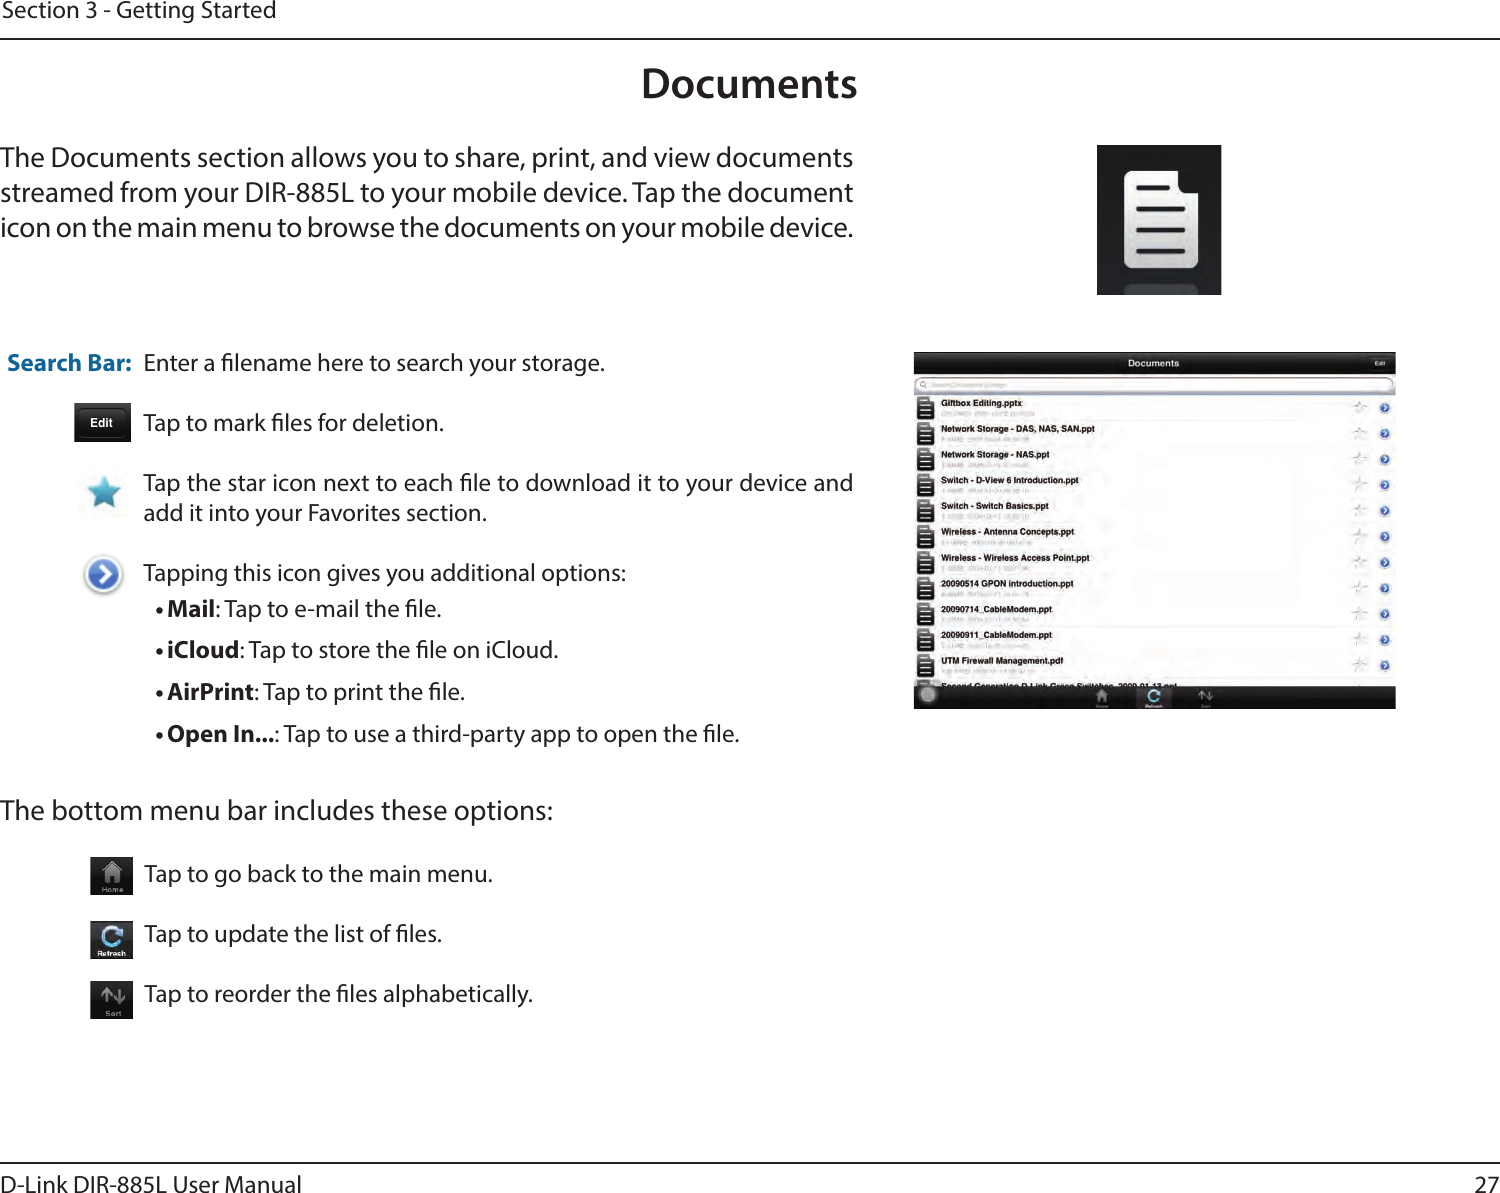 27D-Link DIR-885L User ManualSection 3 - Getting StartedDocumentsThe Documents section allows you to share, print, and view documents streamed from your DIR-885L to your mobile device. Tap the document icon on the main menu to browse the documents on your mobile device.Enter a lename here to search your storage.Tap to mark les for deletion.Tap the star icon next to each le to download it to your device and add it into your Favorites section.Tapping this icon gives you additional options:• Mail: Tap to e-mail the le.• iCloud: Tap to store the le on iCloud.• AirPrint: Tap to print the le.• Open In...: Tap to use a third-party app to open the le.The bottom menu bar includes these options:Search Bar: Tap to go back to the main menu.Tap to update the list of les.Tap to reorder the les alphabetically.